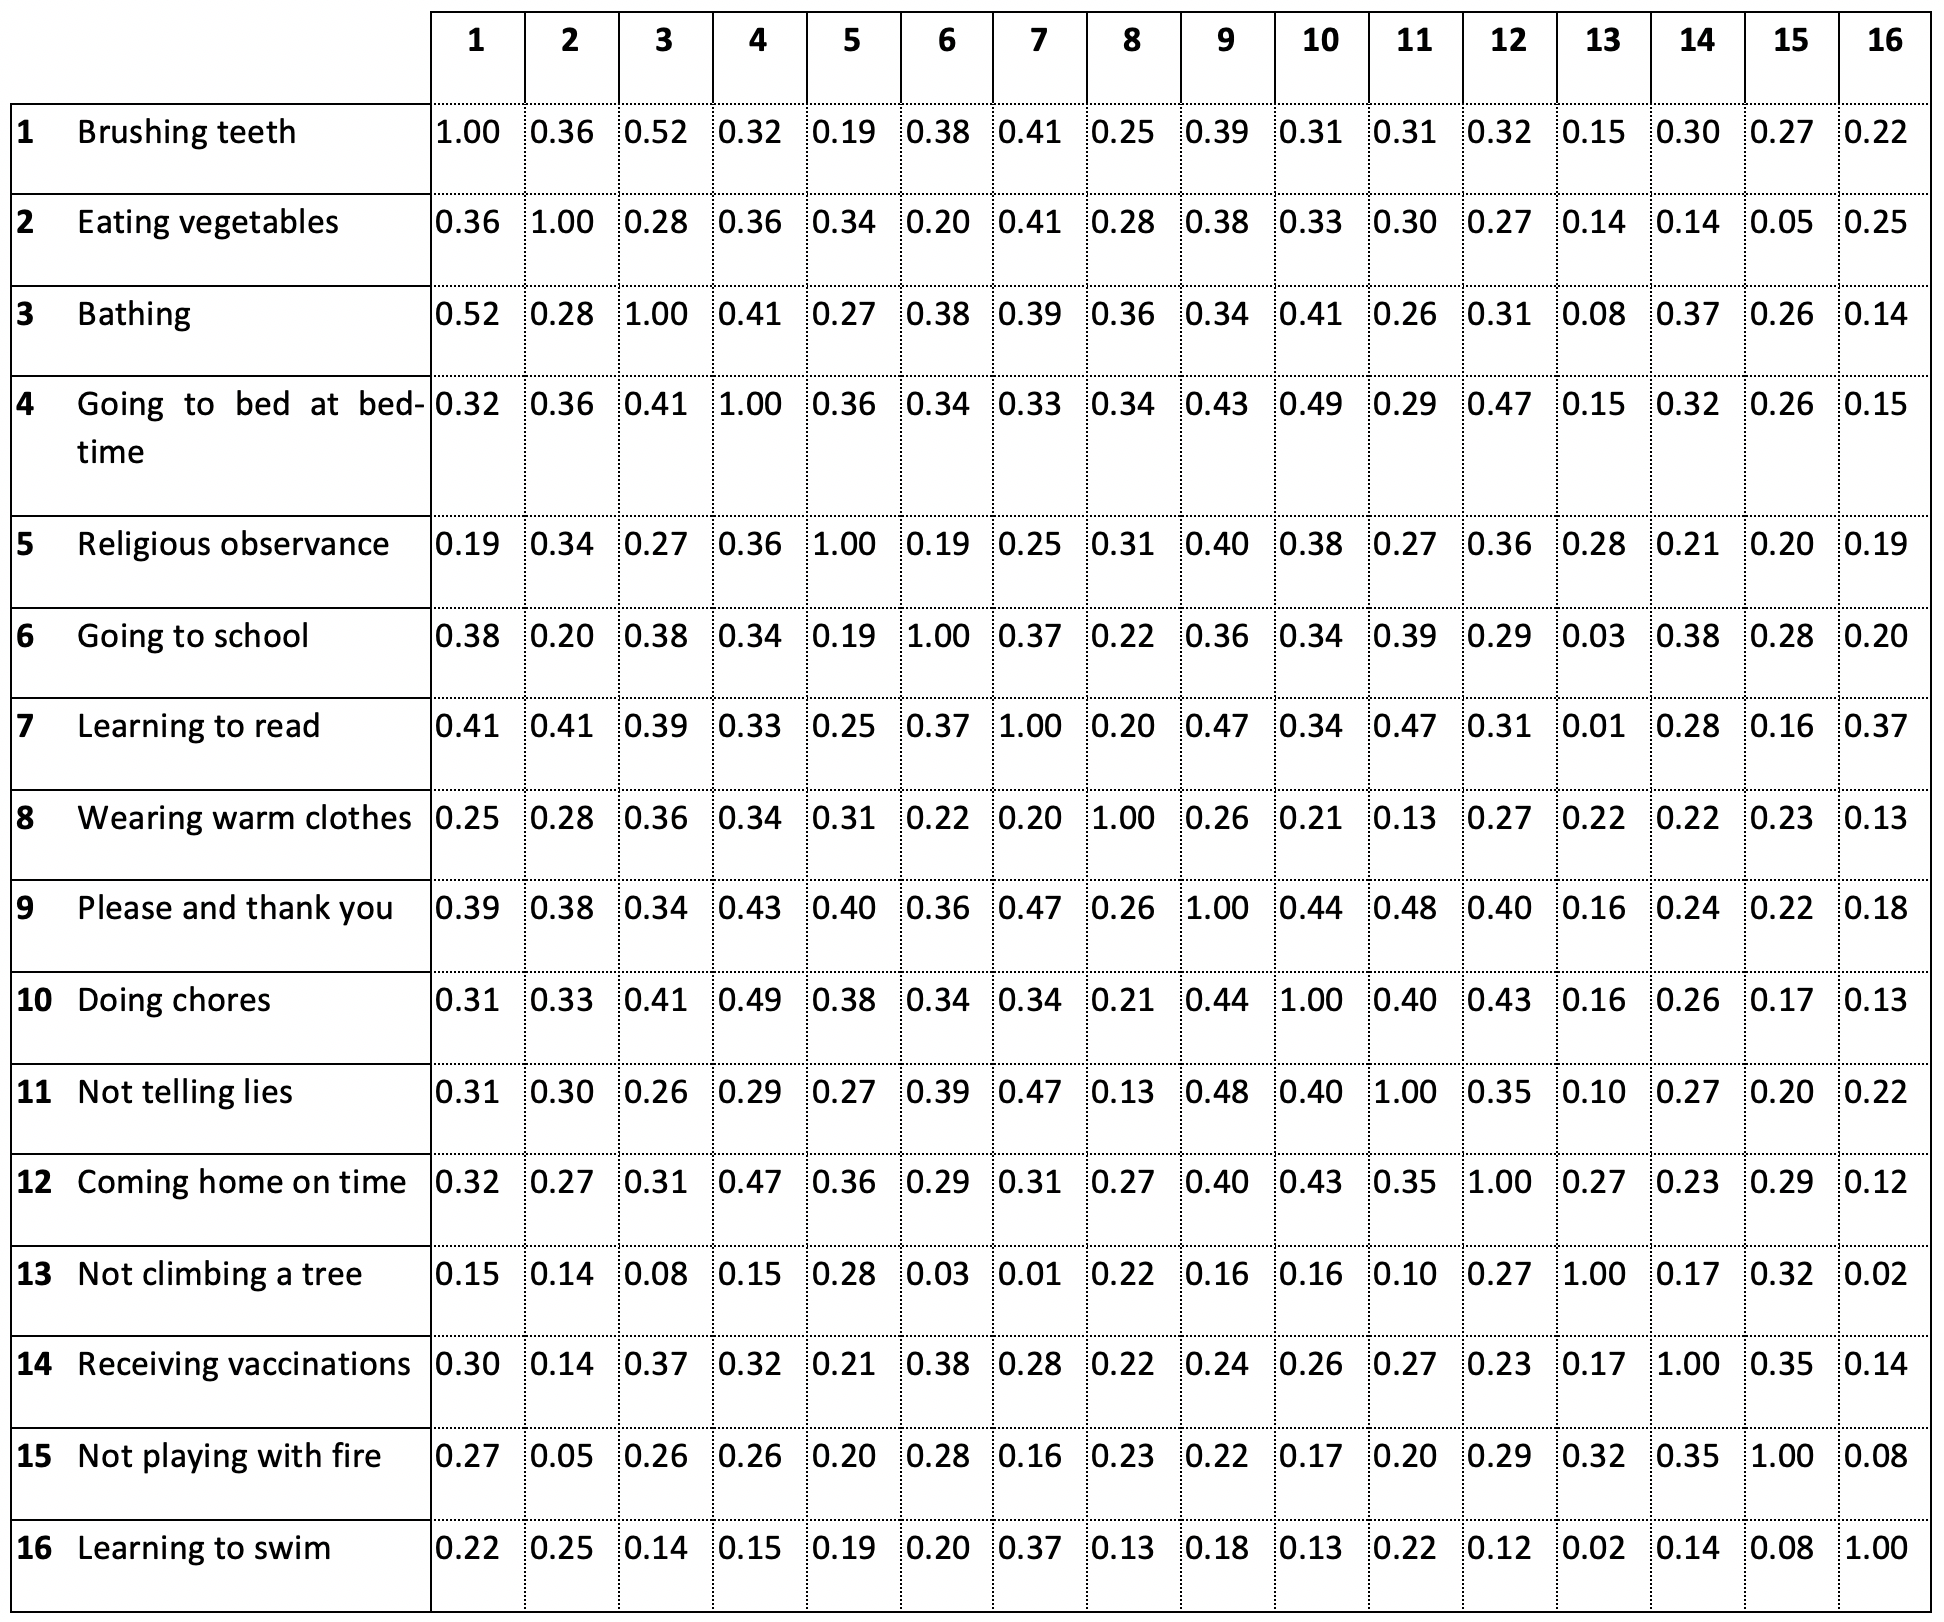 The Taking Children Seriously survey table of correlation coefficients